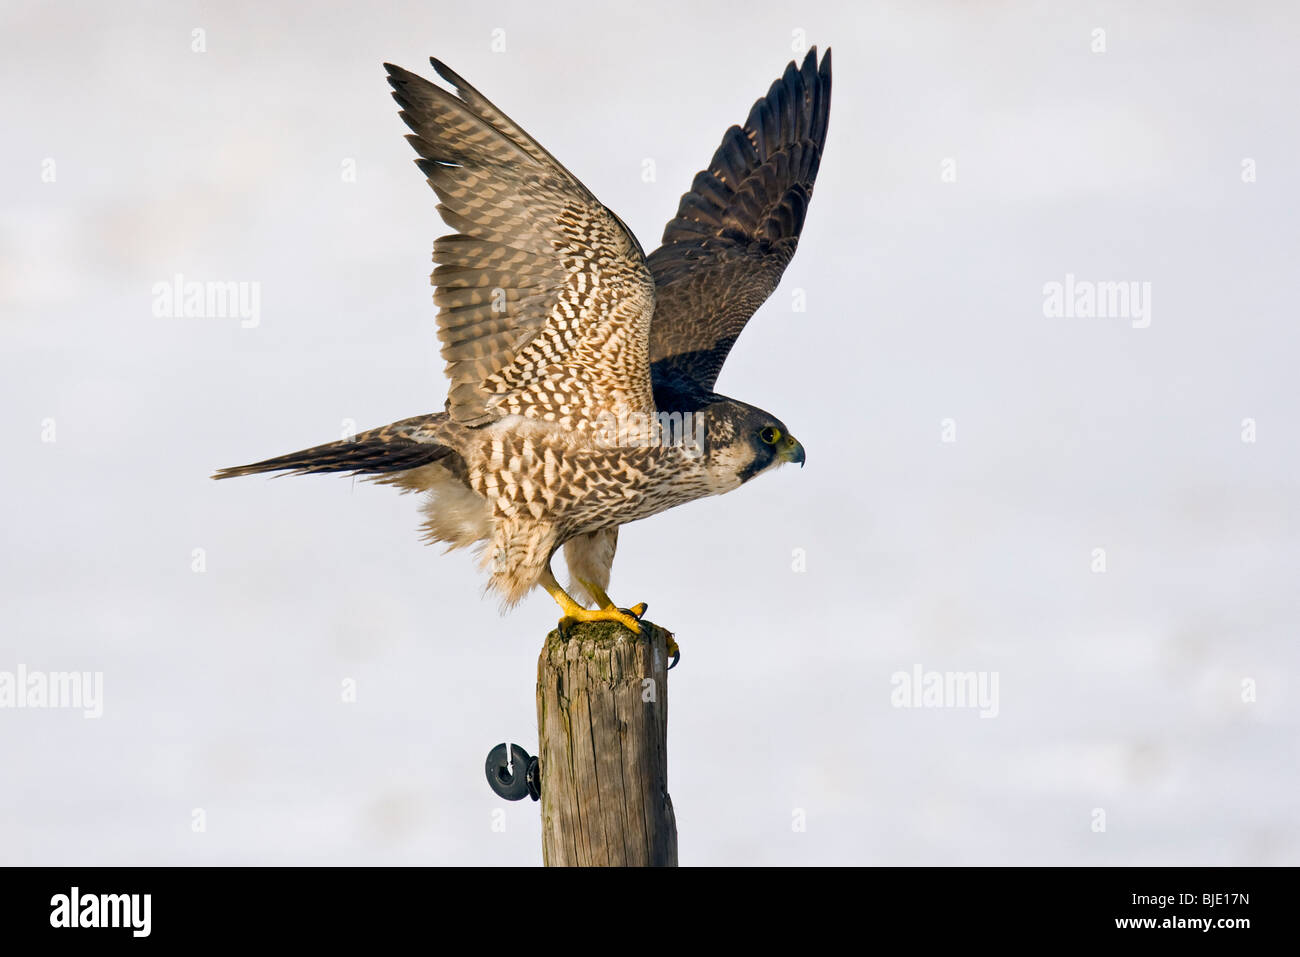 Young male Peregrine falcon (Falco peregrinus) taking off from pole to hunt in meadow in the snow in winter, Uitkerke, Belgium Stock Photo